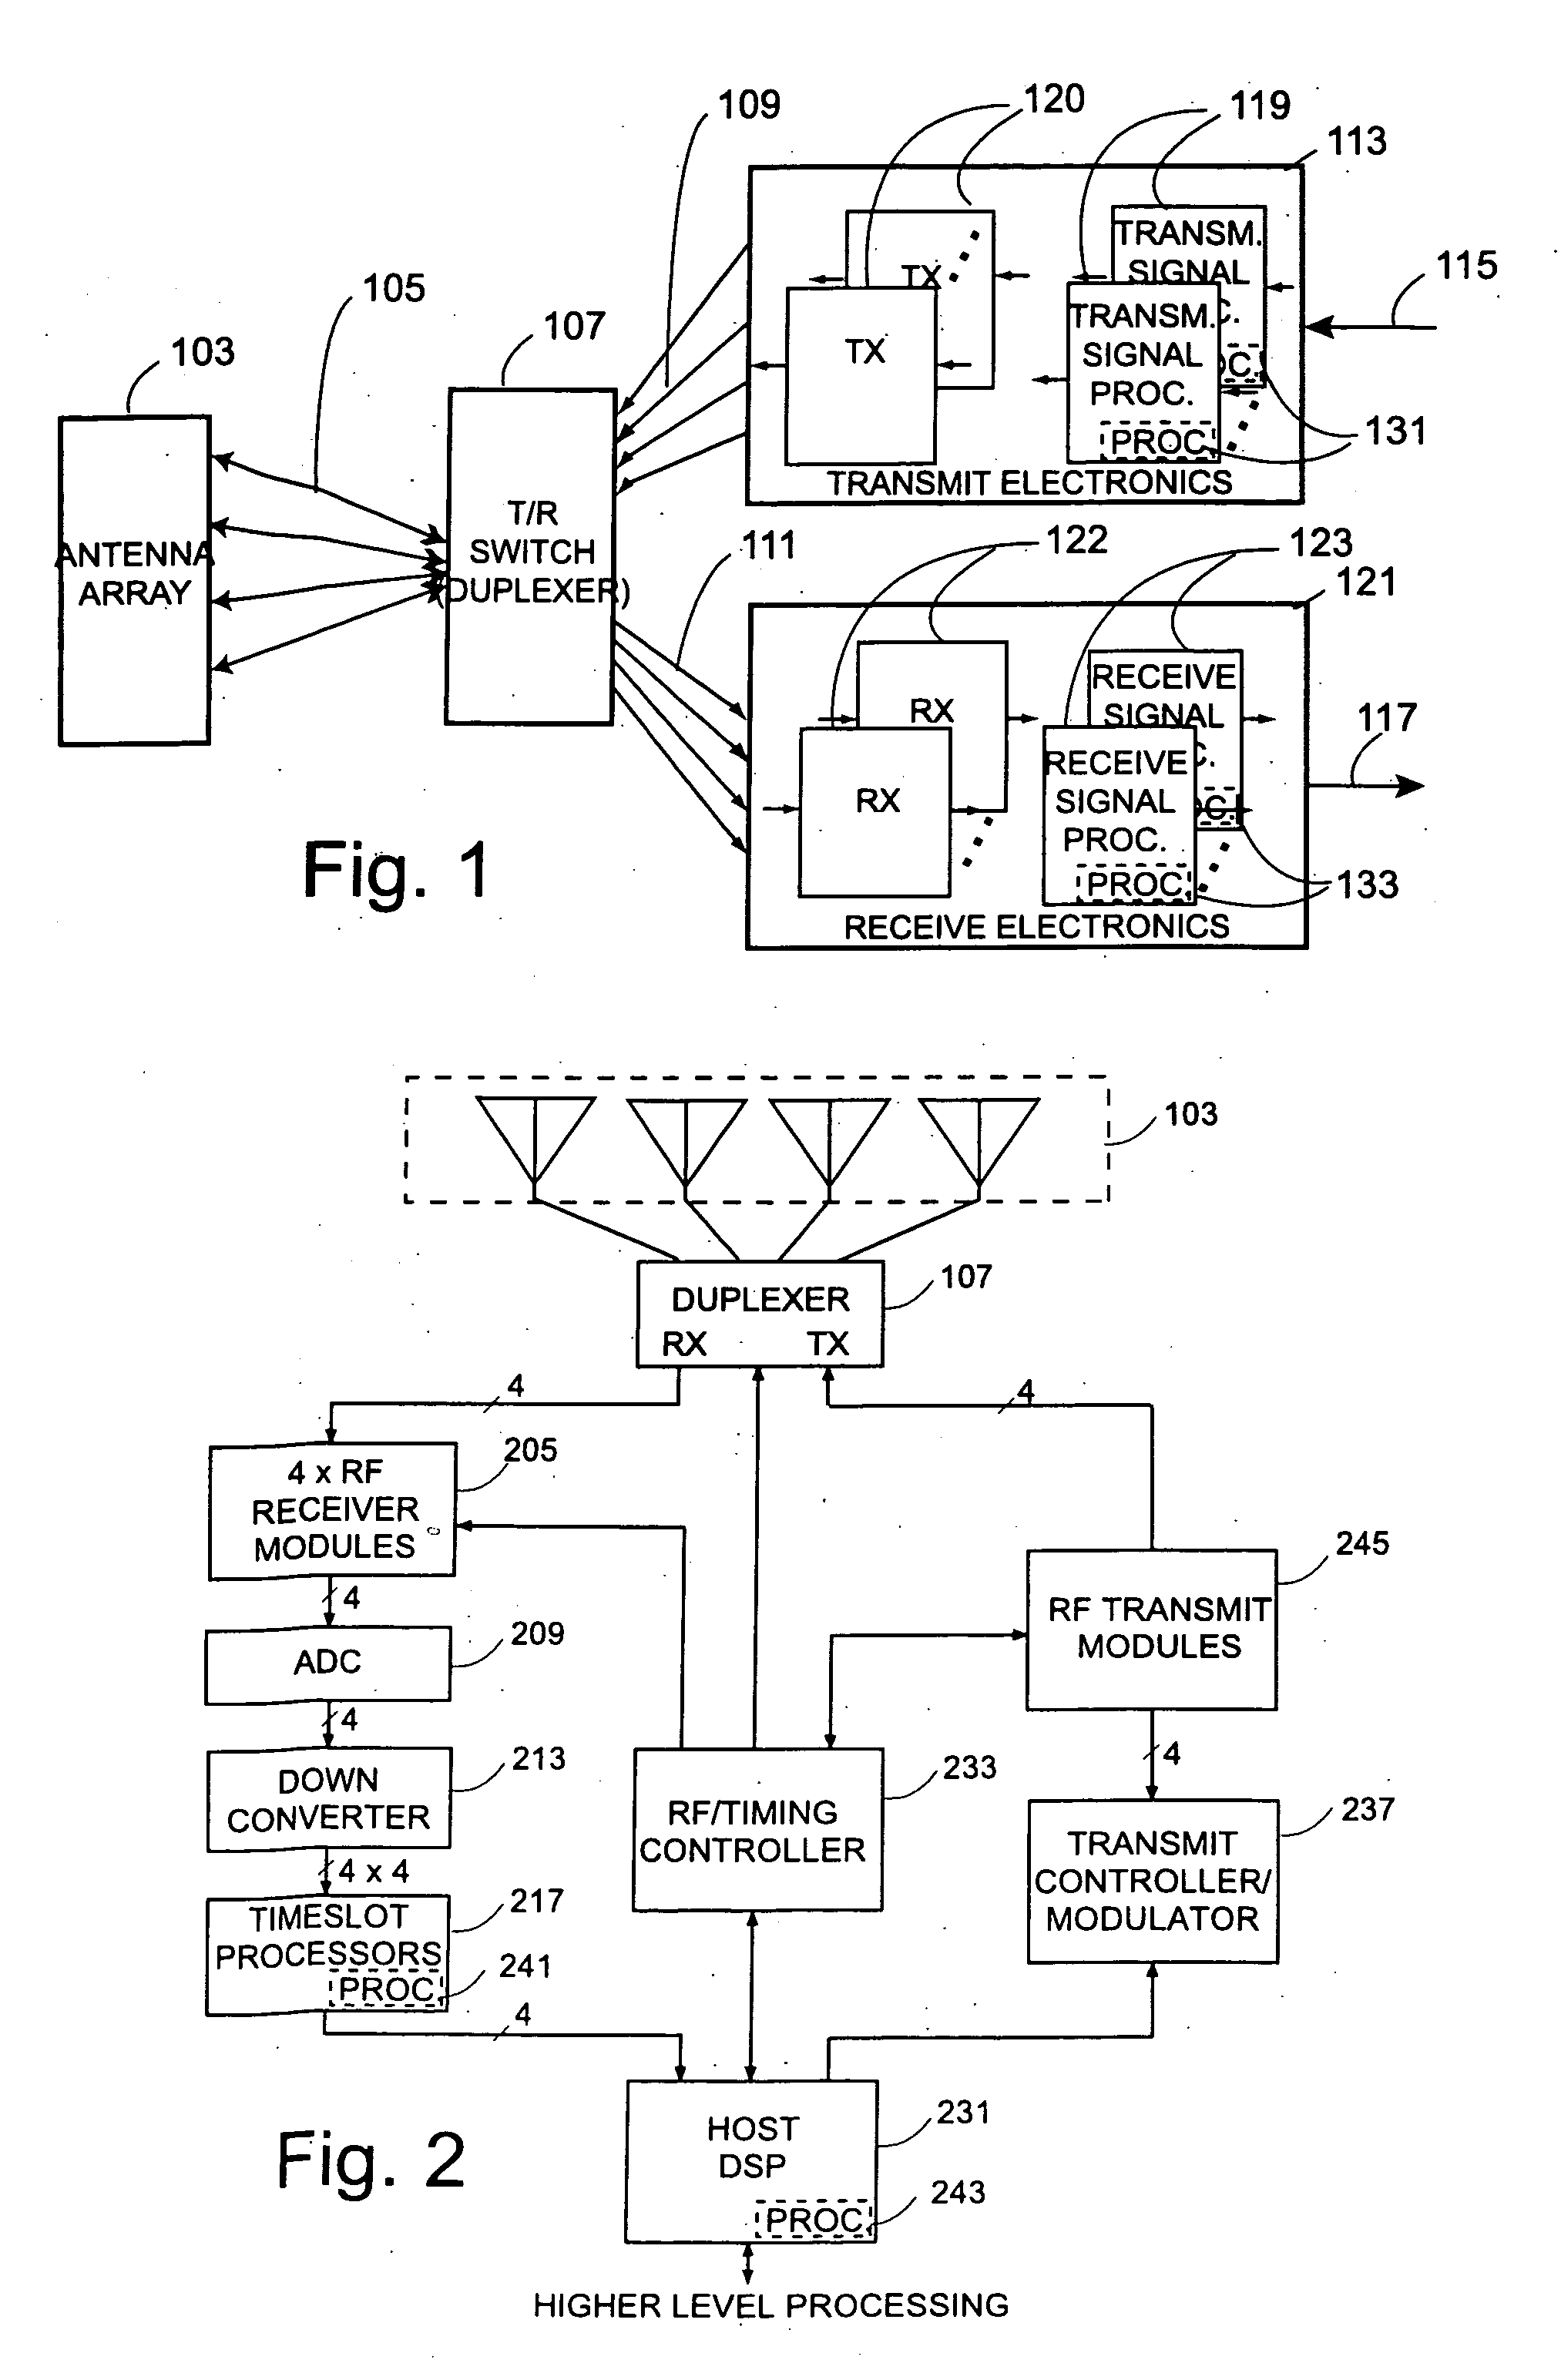 Null deepening for an adaptive antenna based communication station